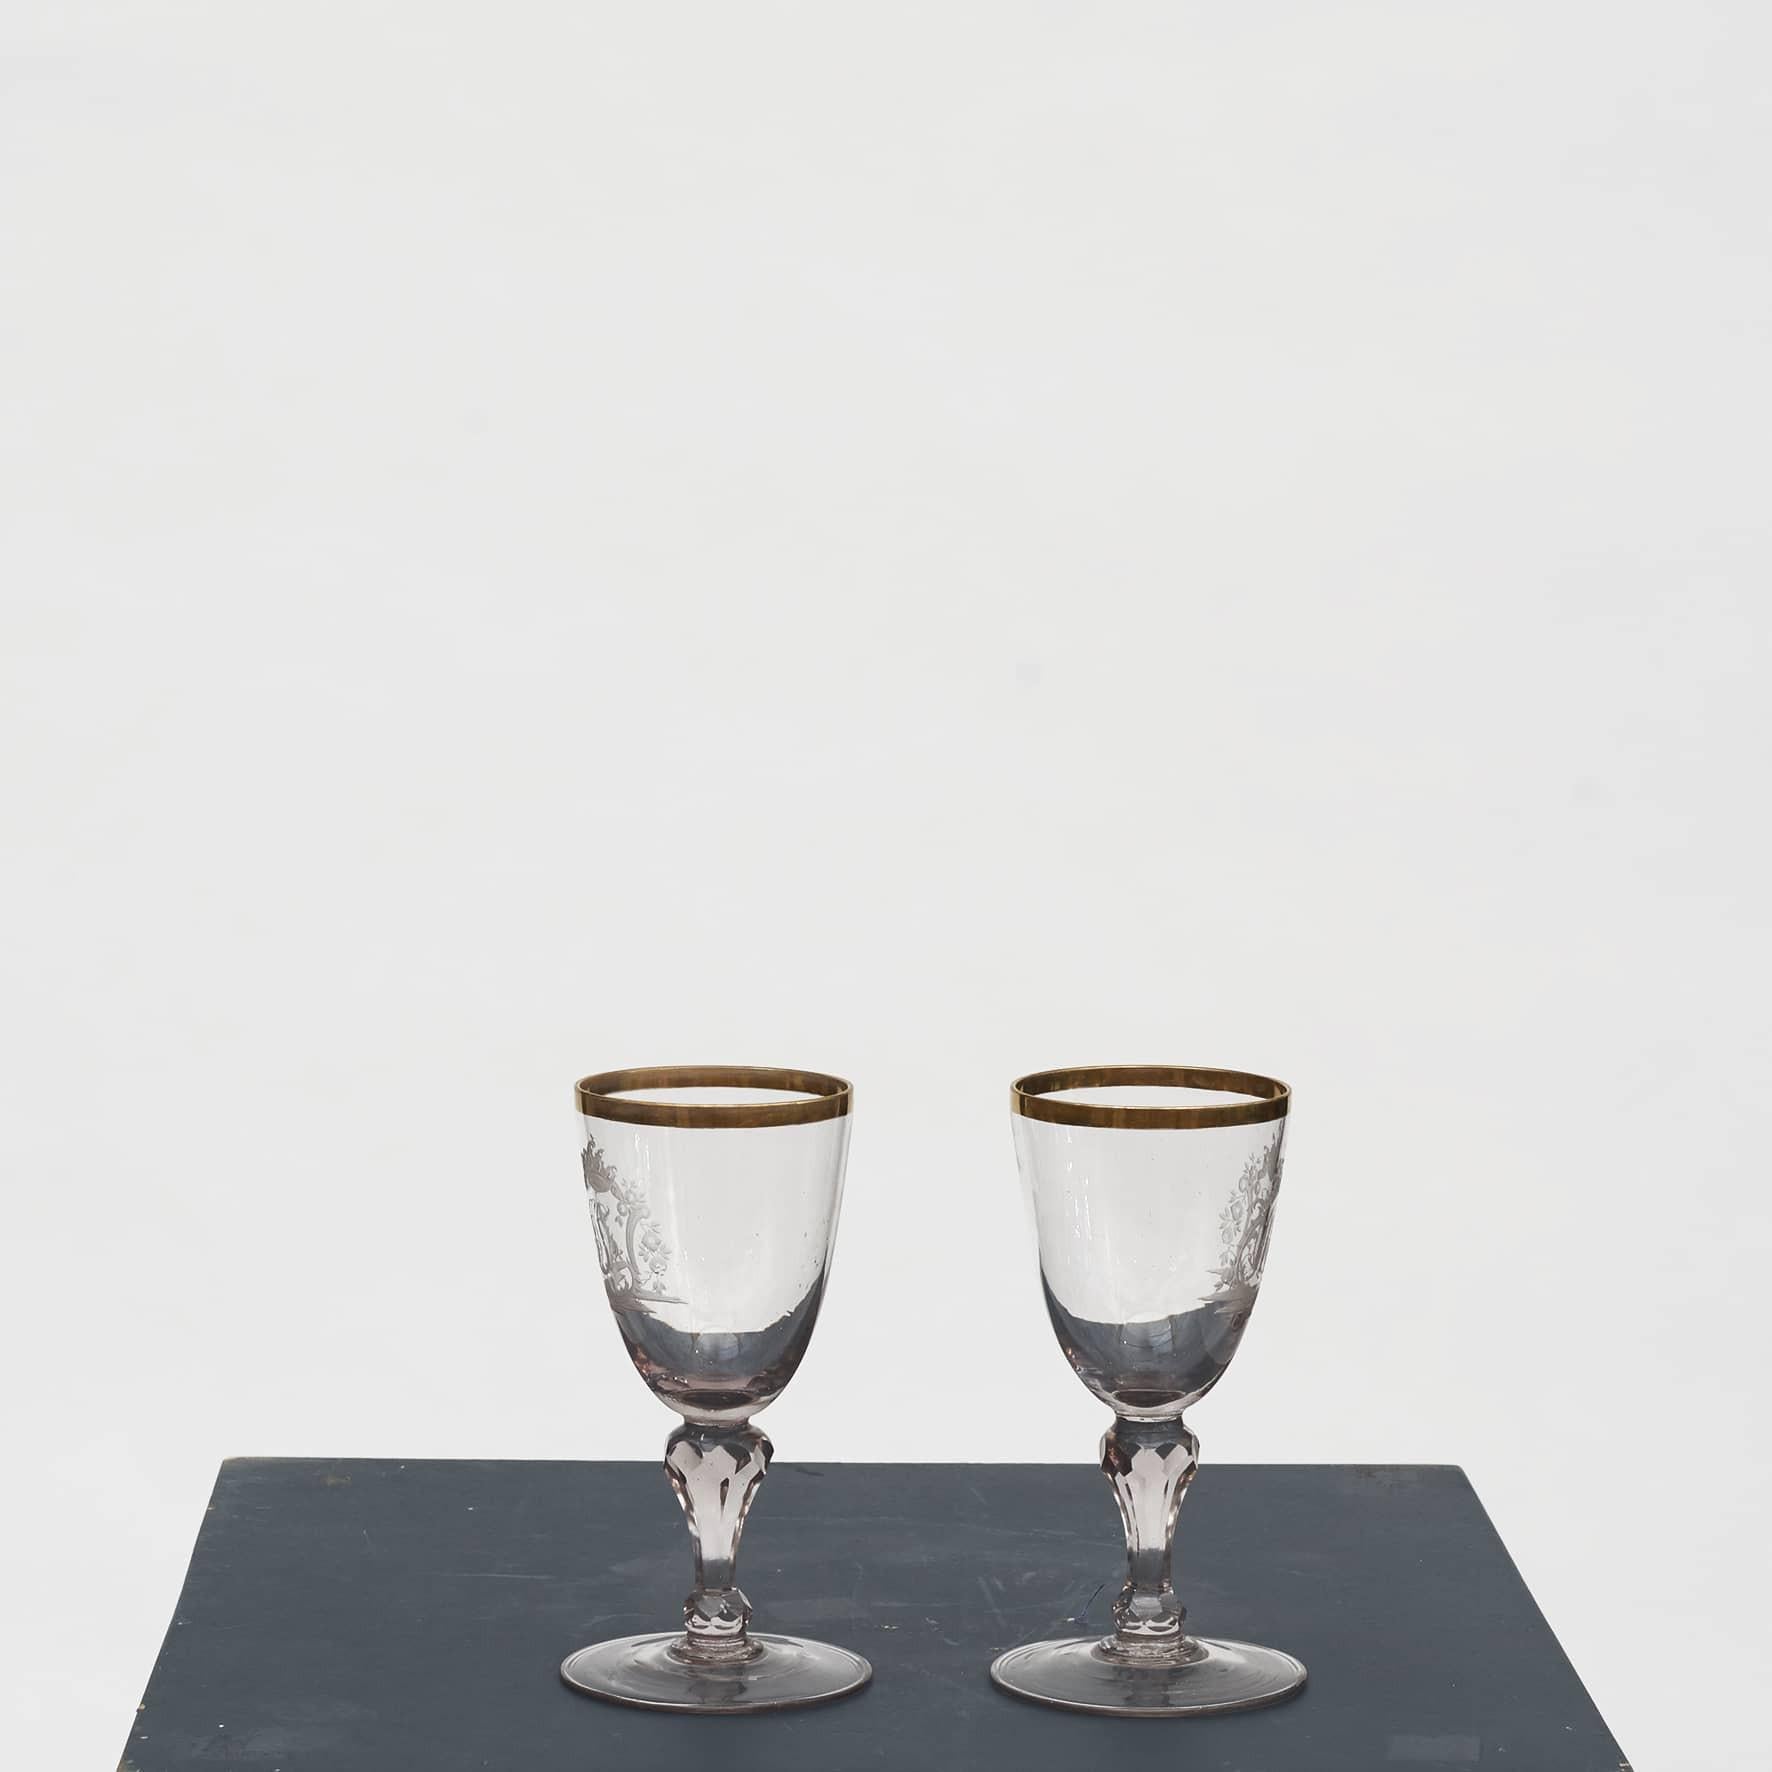 Pair of hand-blown baroque wine glasses engraved with monogram and scrollwork. Gold rimmed and facet cut stem.
The glasses probably originate from Germany, midt 18th Century.

In fine condition.
Sold as a pair.
